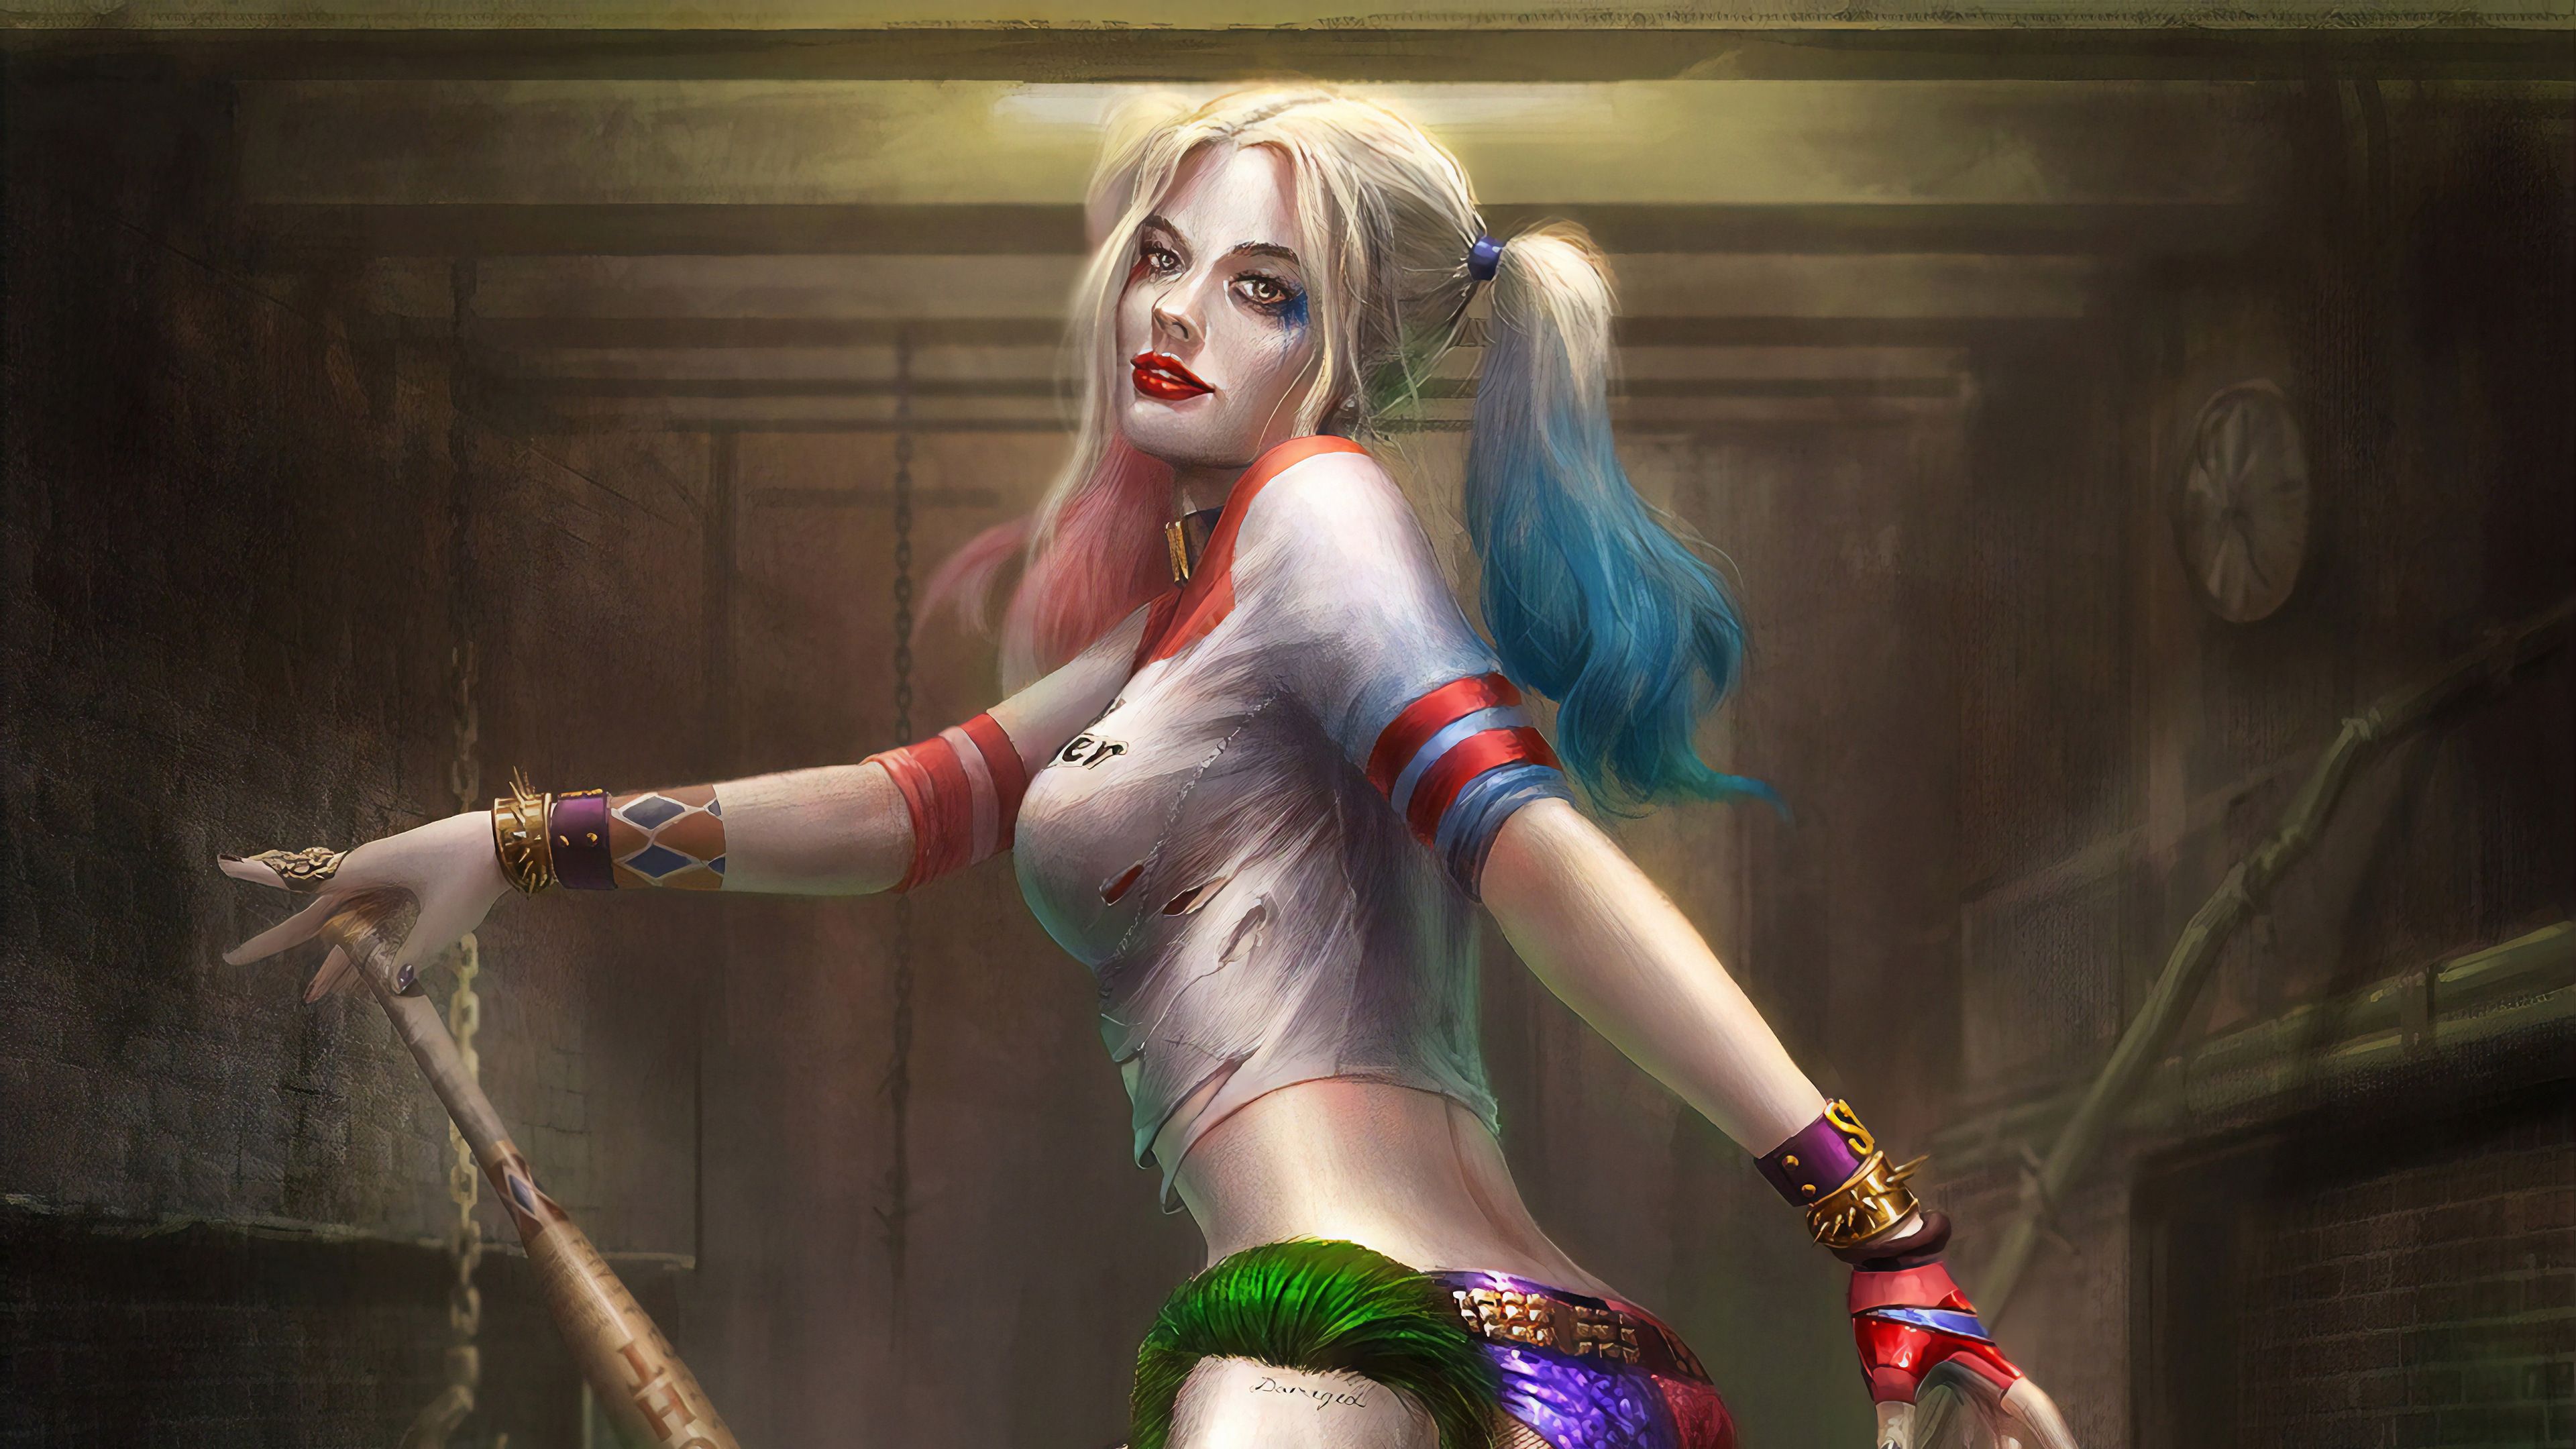 Anime Harley Quinn Wallpapers Wallpaper Cave